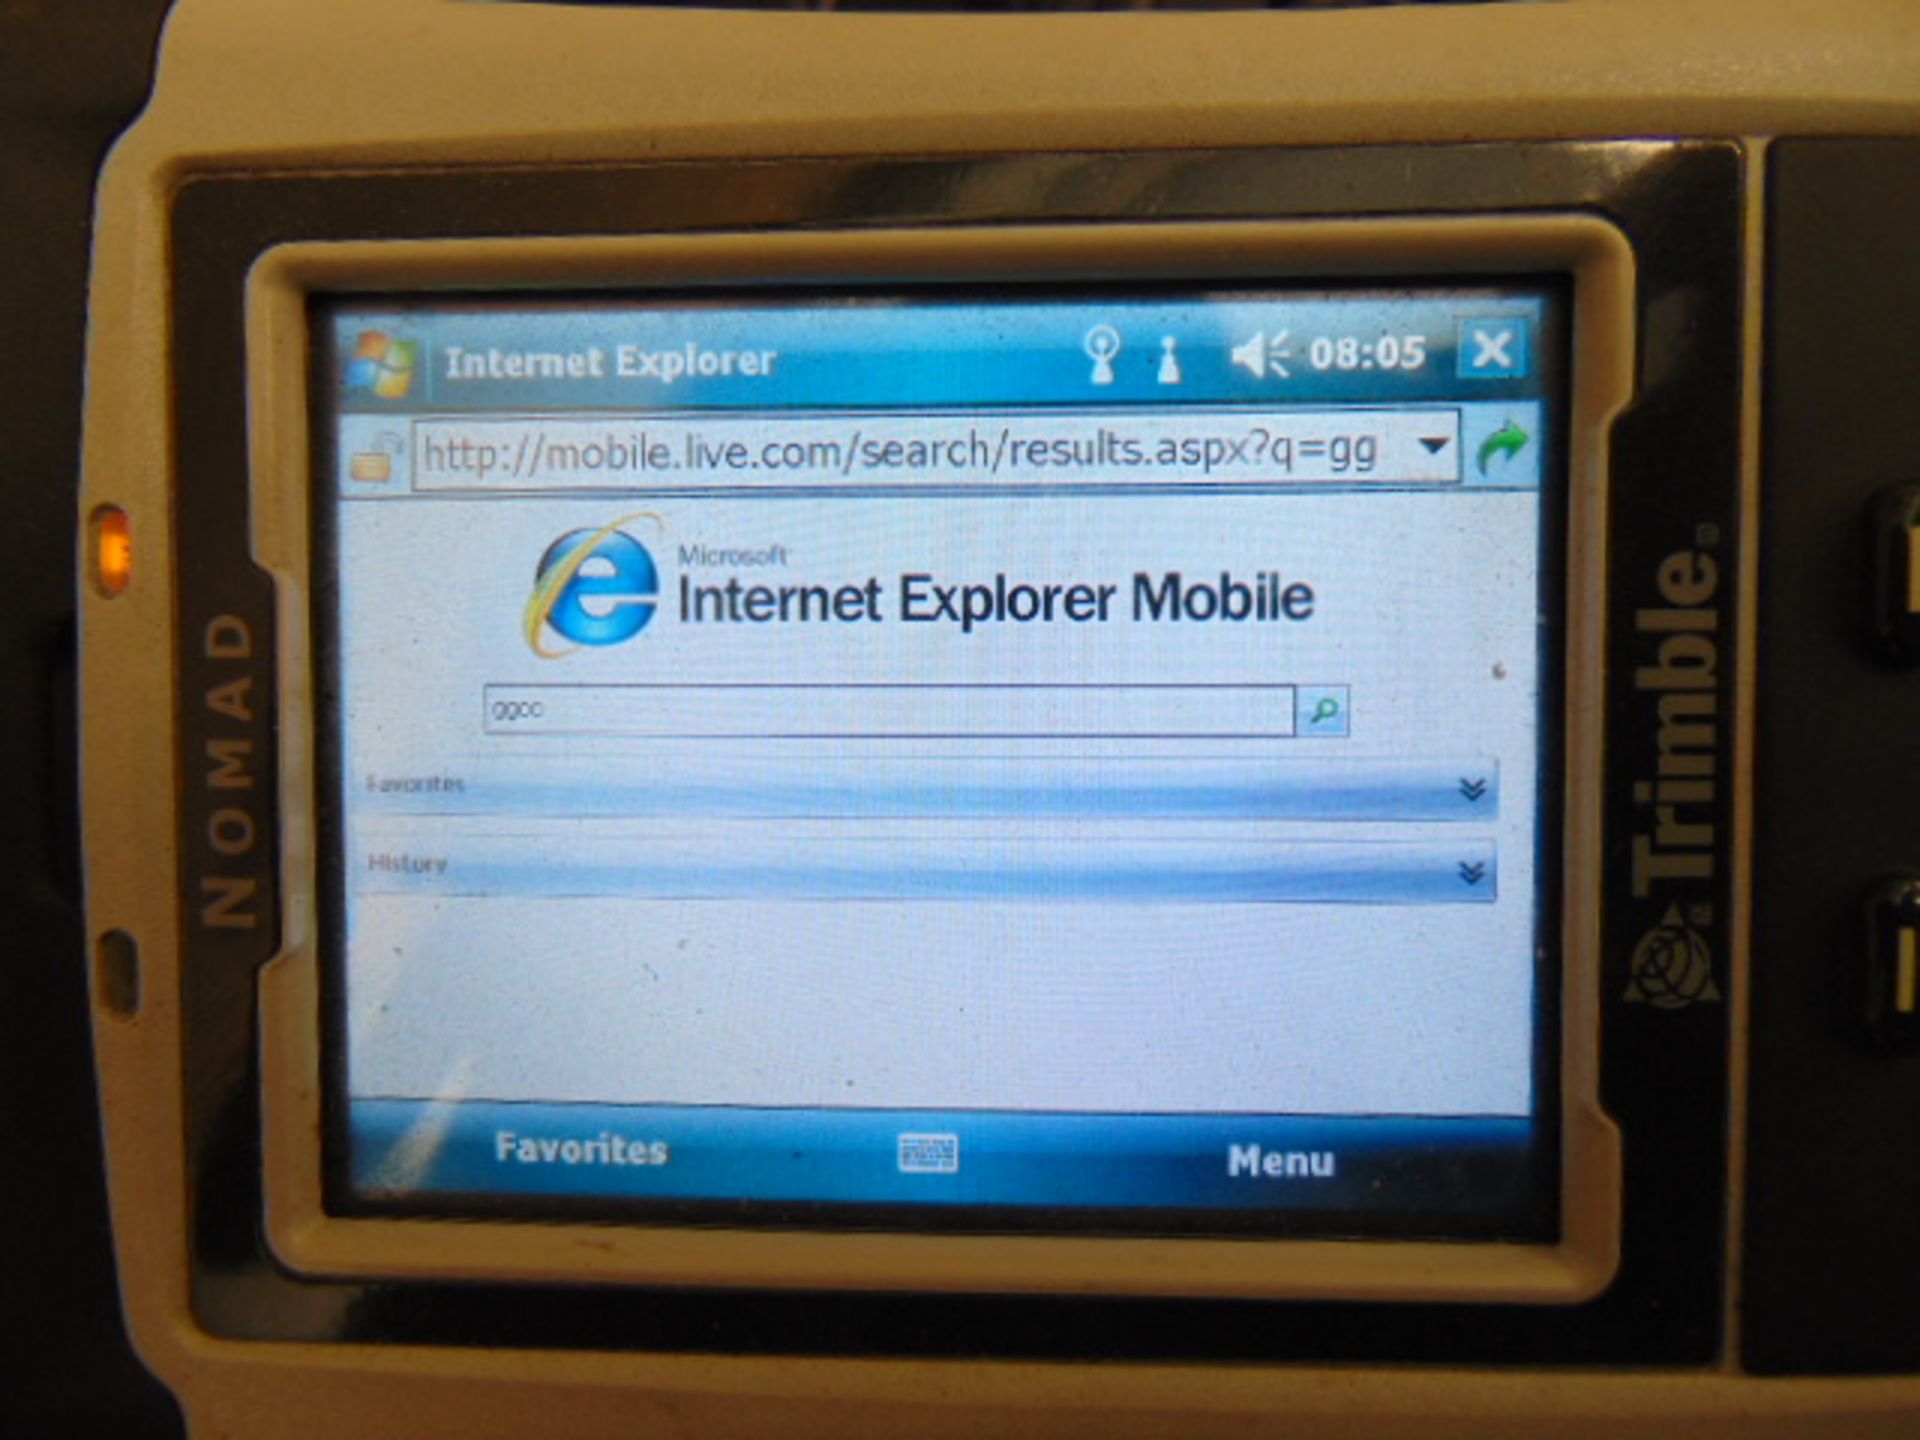 Trimble Nomad Rugged Handheld Computer c/w Accessories as shown - Image 7 of 12